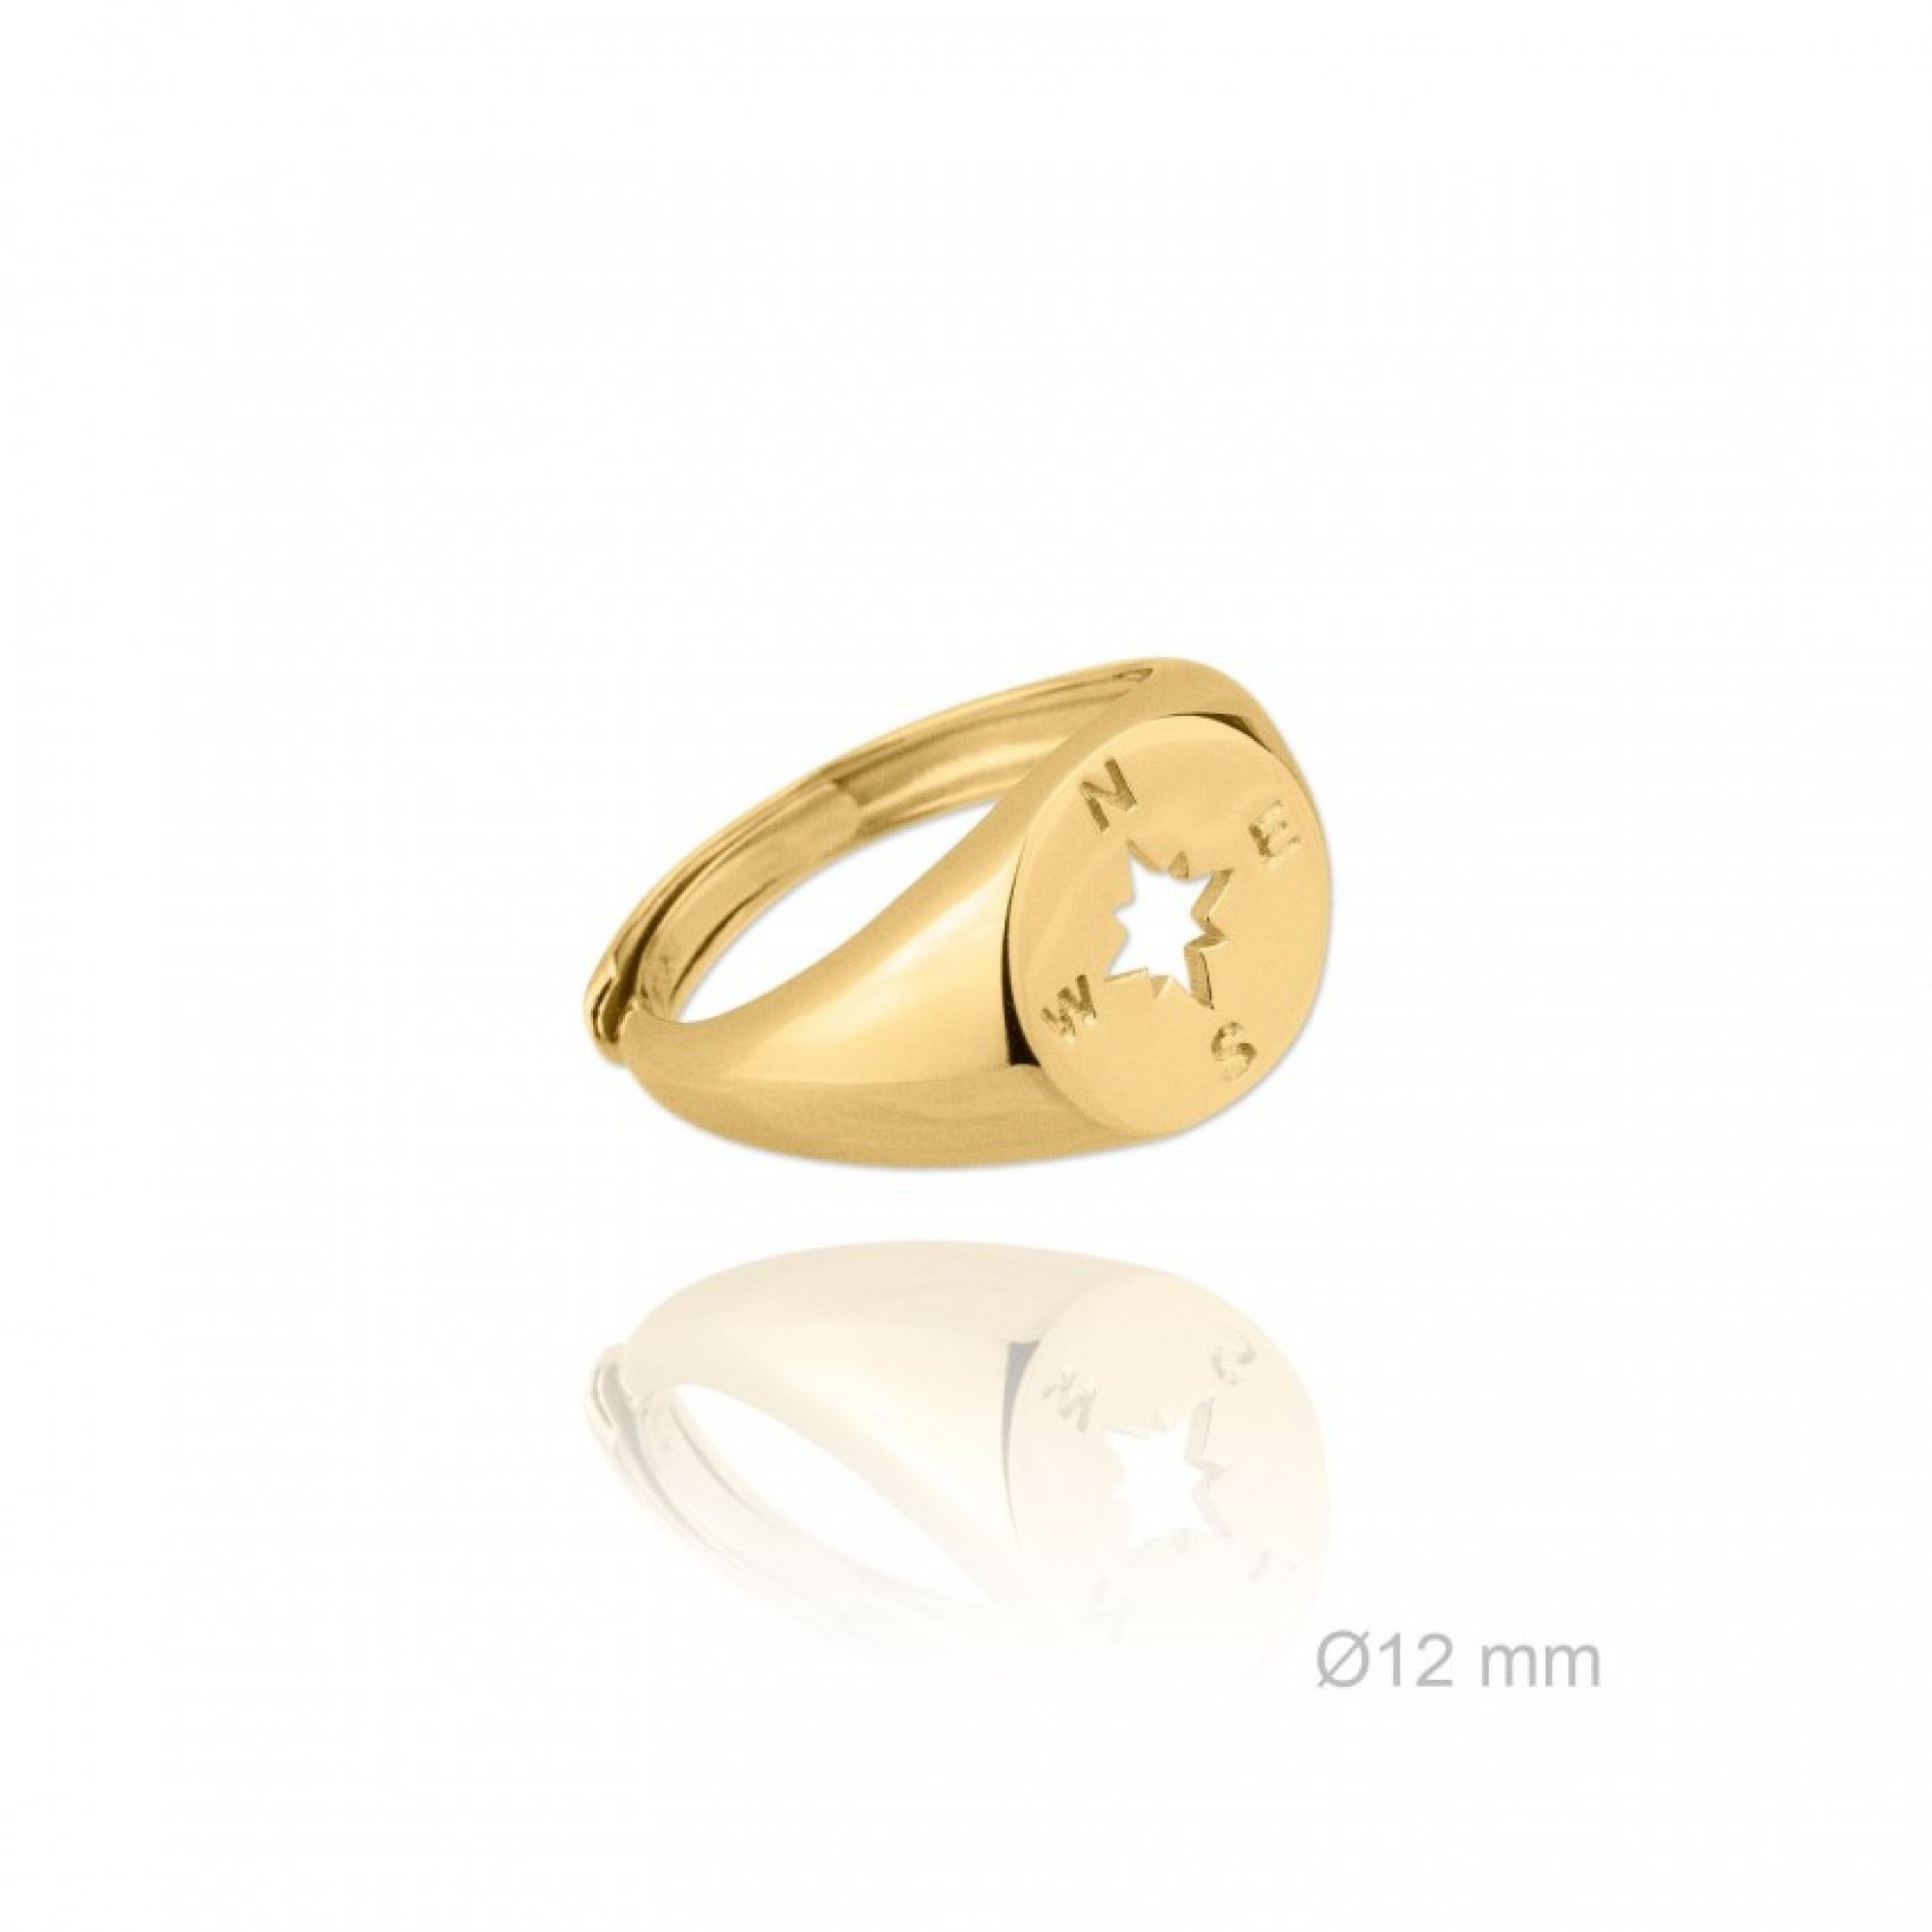 Gold plated compass ring